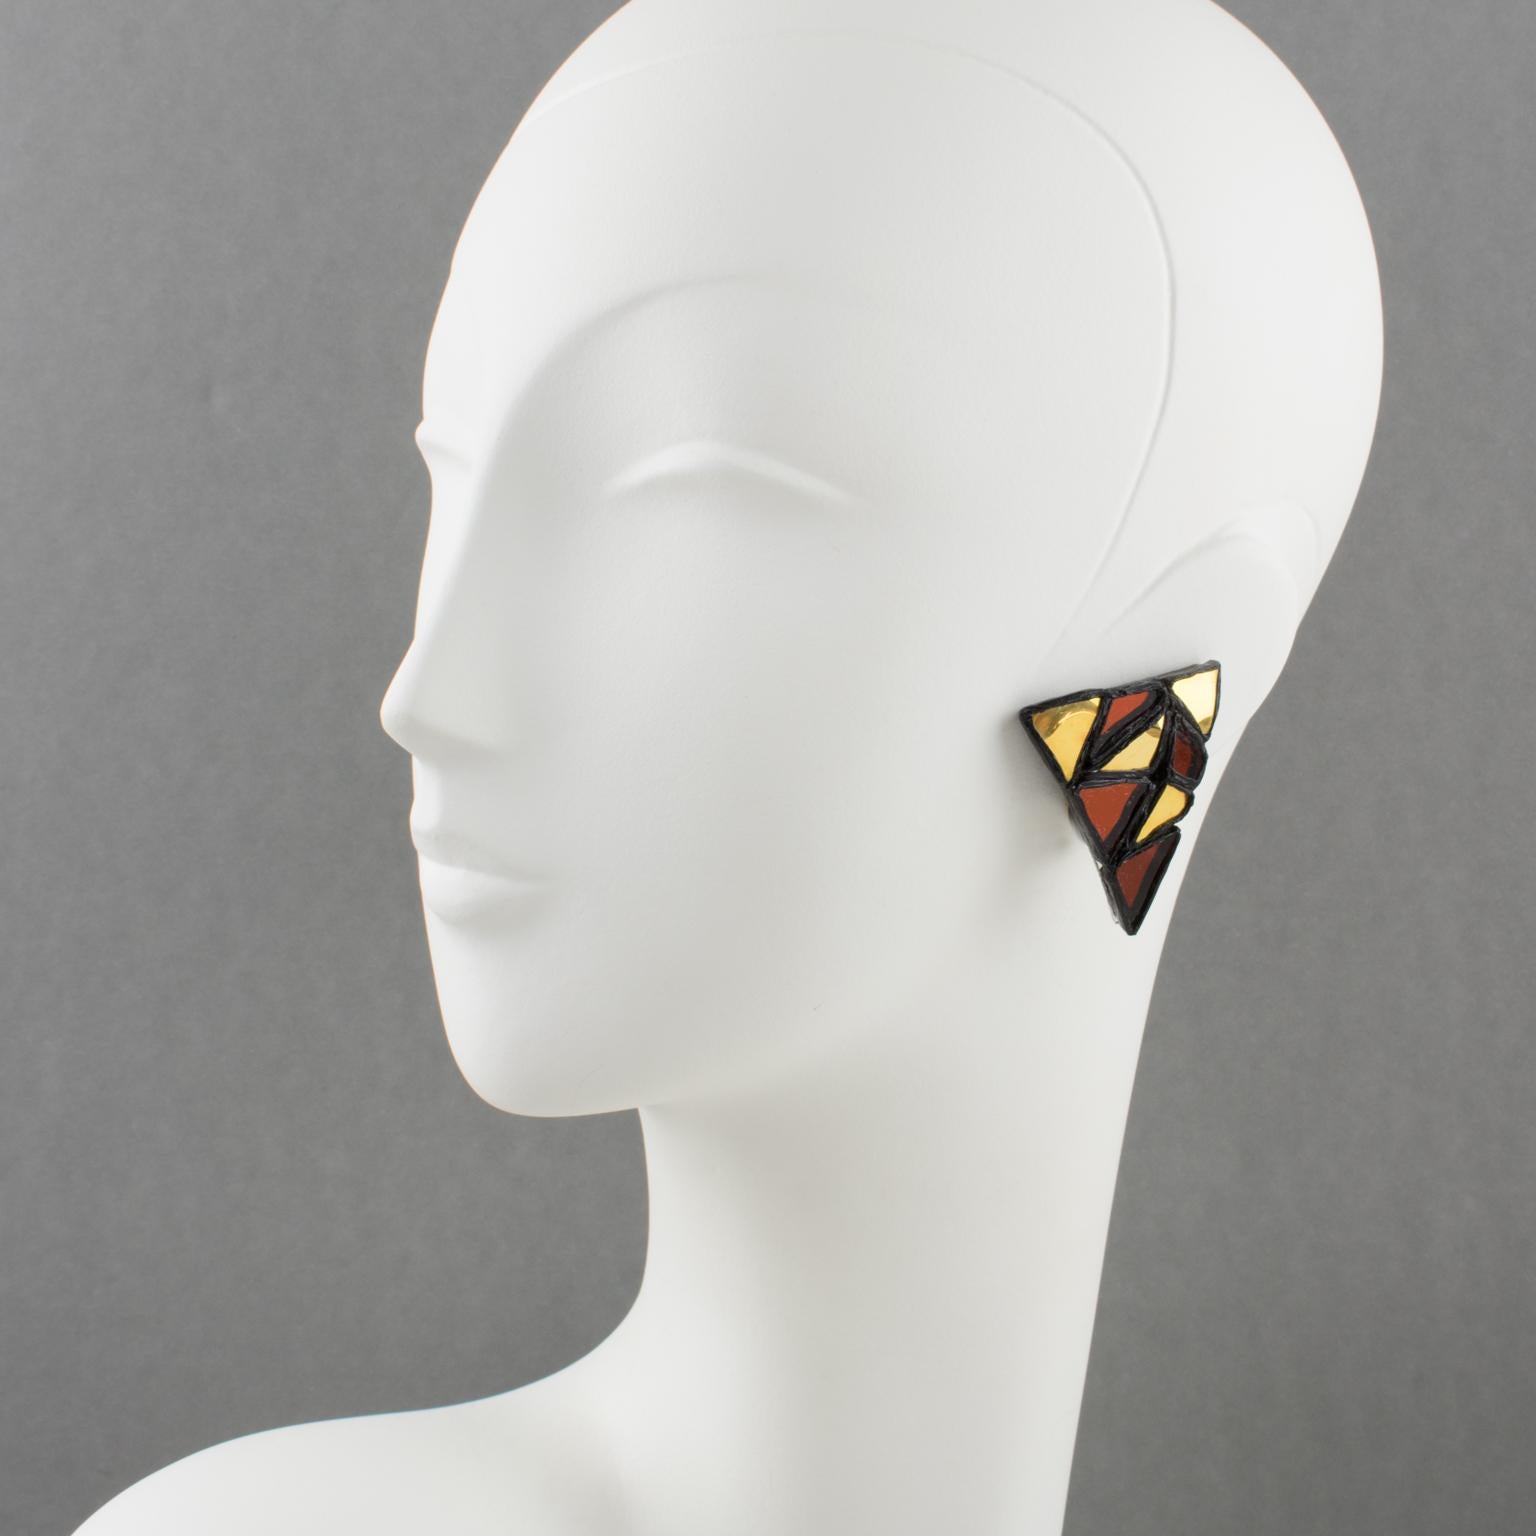 These exquisite Irena Jaworska Talosel or resin clip-on earrings feature a geometric triangle shape in black resin framing, topped with a mosaic of mirrors in gold and rust colors. Irena Jaworska is one of the Line Vautrin School students whose work